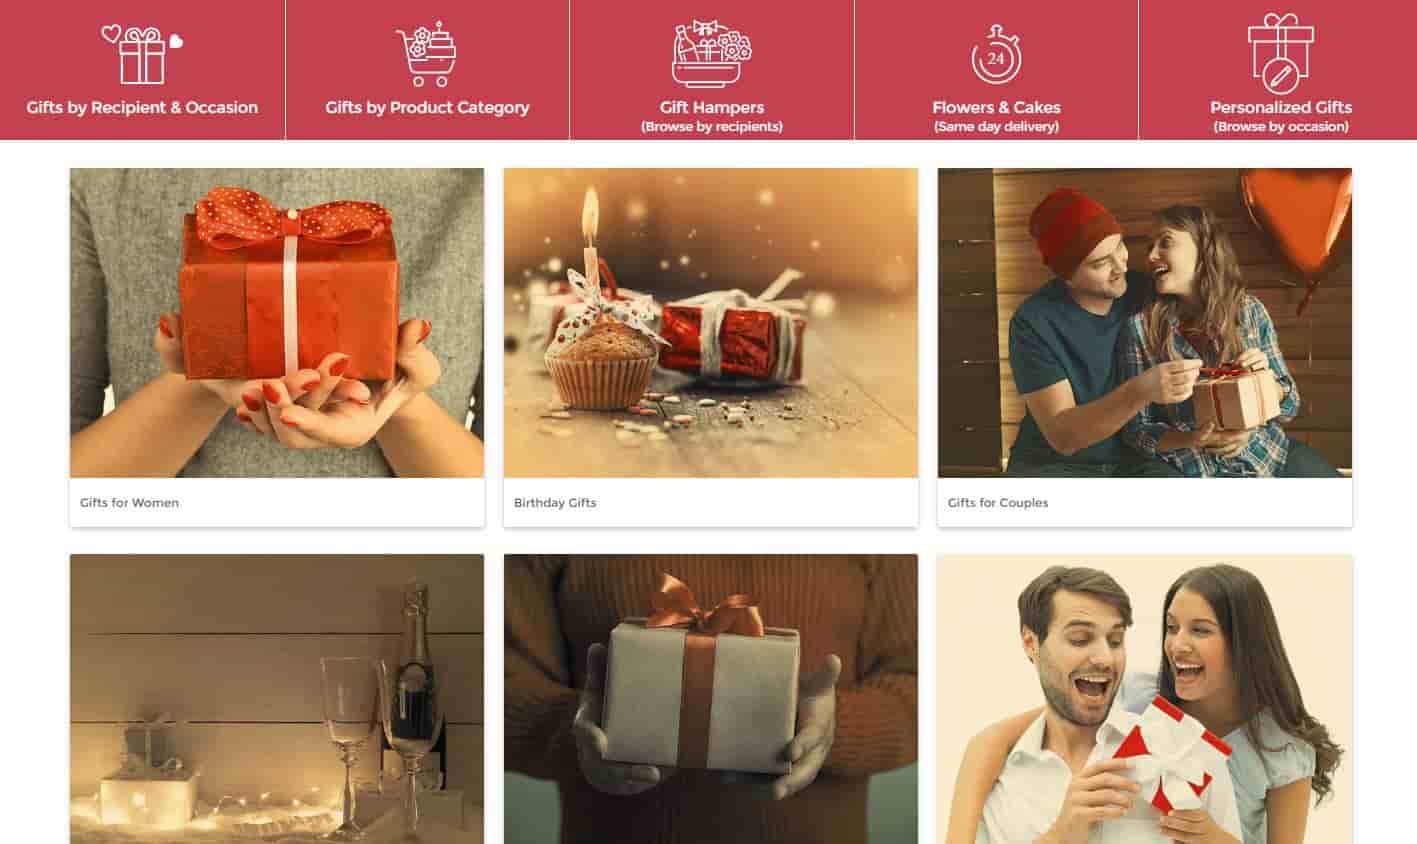 IGP is India’s largest multi-category online gifting company, providing one of the best curated collection of gifts, flowers, cakes & personalized products for all personal occasions & festivals (both domestic & international). The firm has a global footprint with almost half of its orders originating from outside of India and almost one-third of its orders getting delivered internationally to more than 90 countries across the globe. With significant lead in curation & logistics, IGP is now heavily investing in technology to solve gift discovery problem through machine learning & tech enabled merchandizing. IGP has brought to consumers India’s first ever Gift Discovery platform, taking a massive leap forward in addressing consumers’ gifting needs. For more information please visit: www.igp.com